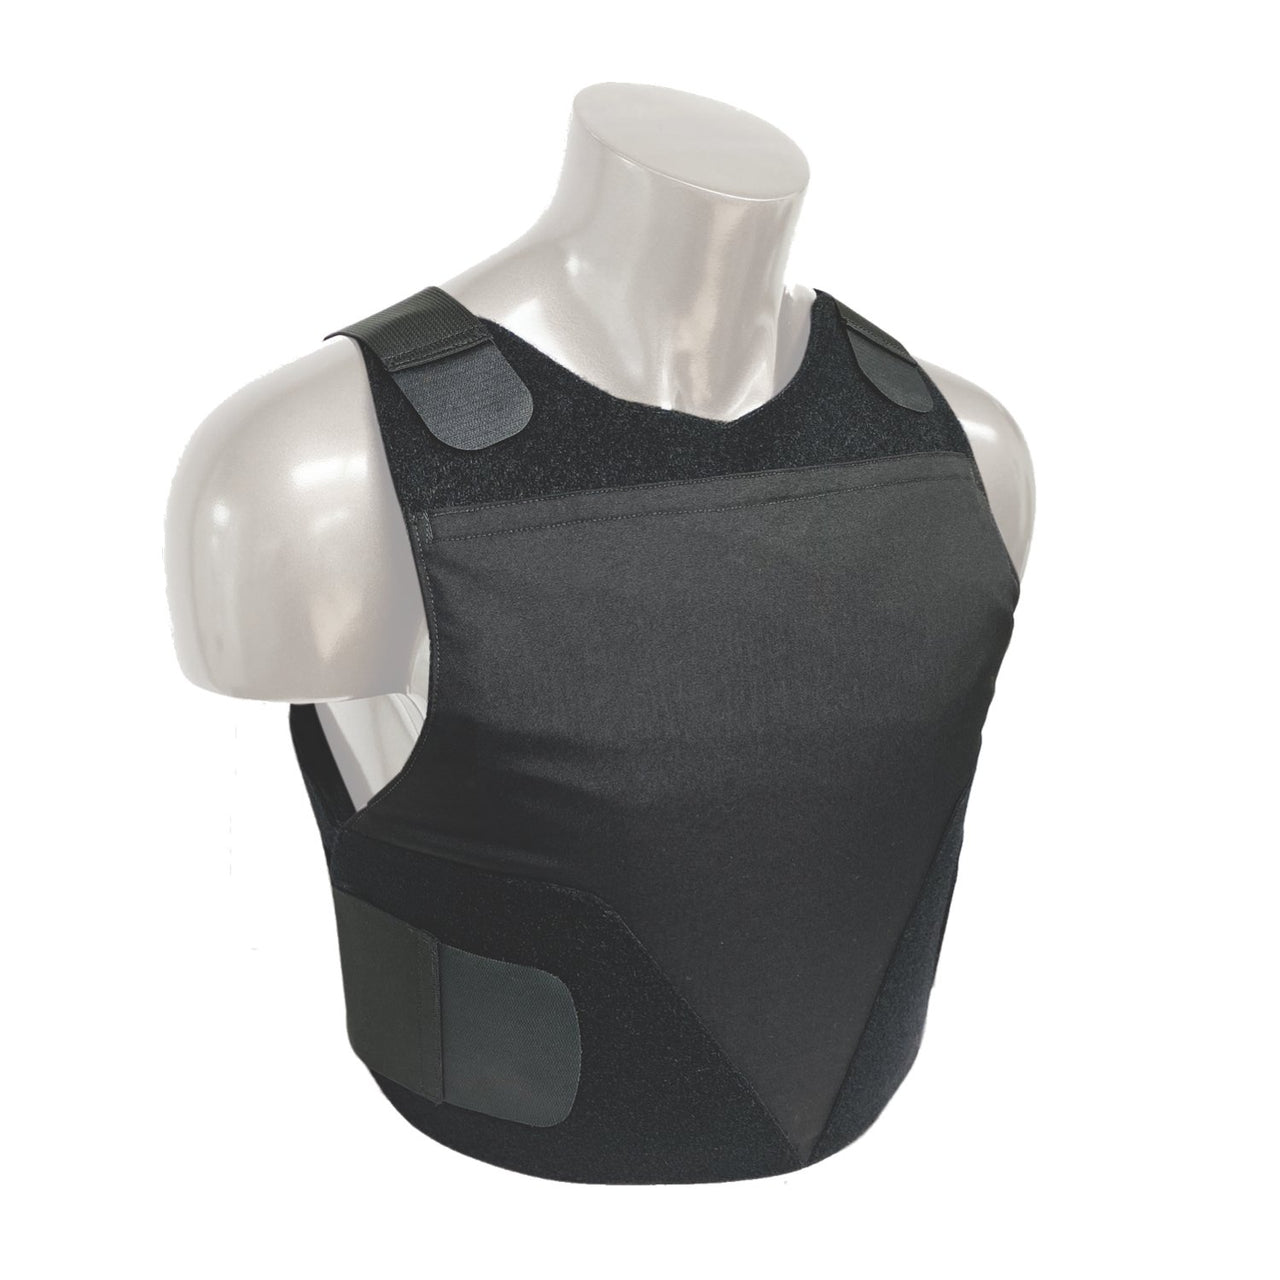 A Body Armor Direct mannequin wearing a black vest.